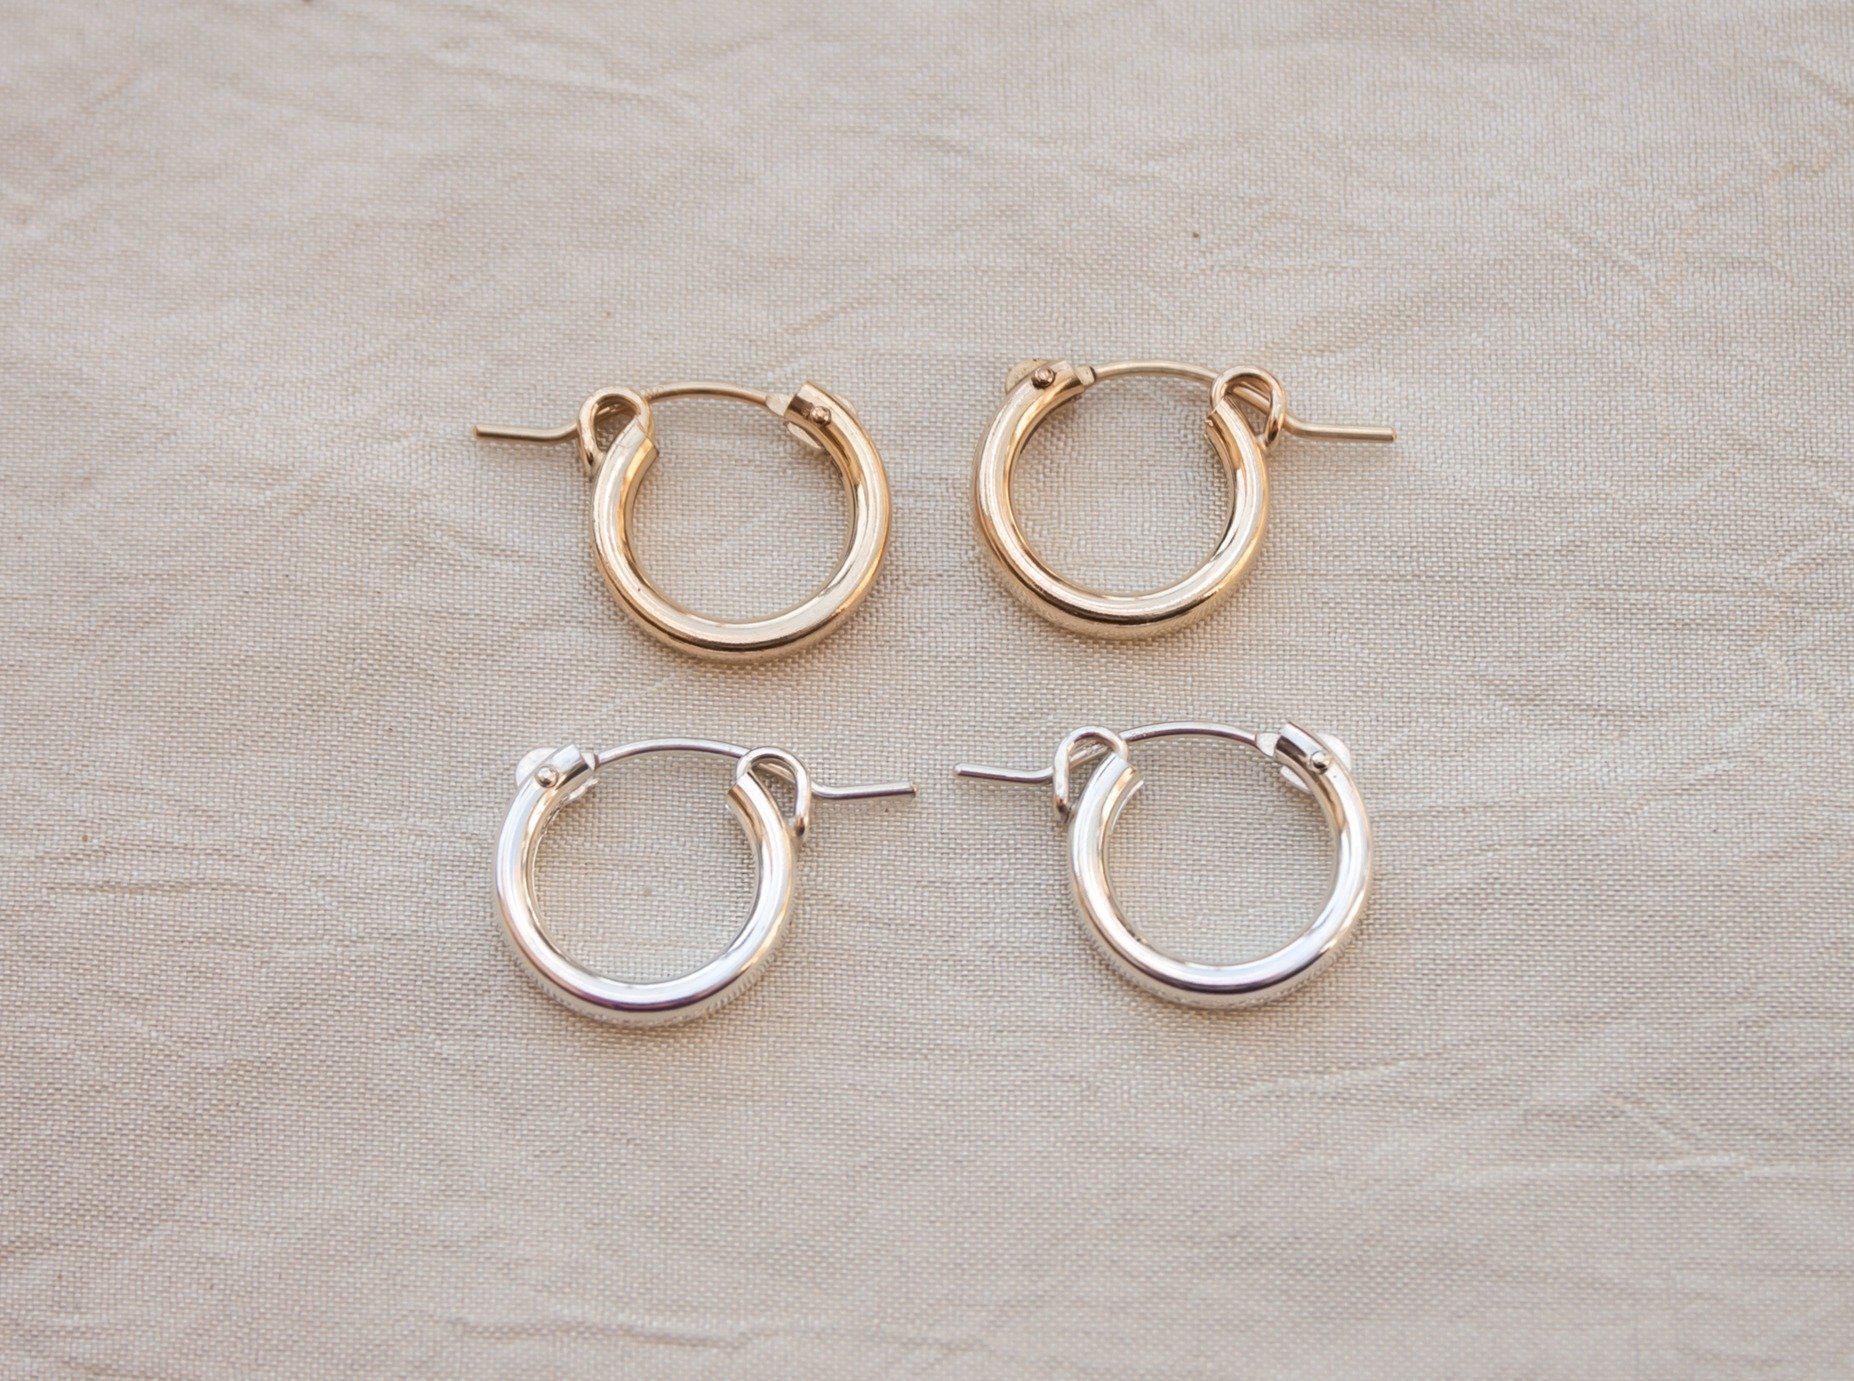 Click hoop earrings might be basic, but never boring. Just the right size to put them in and forget about them but still manage to look put together, a total win! Sterling silver or gold fill, featuring hollow tubes with click-close mechanism. Designed and handmade in Los Angeles.